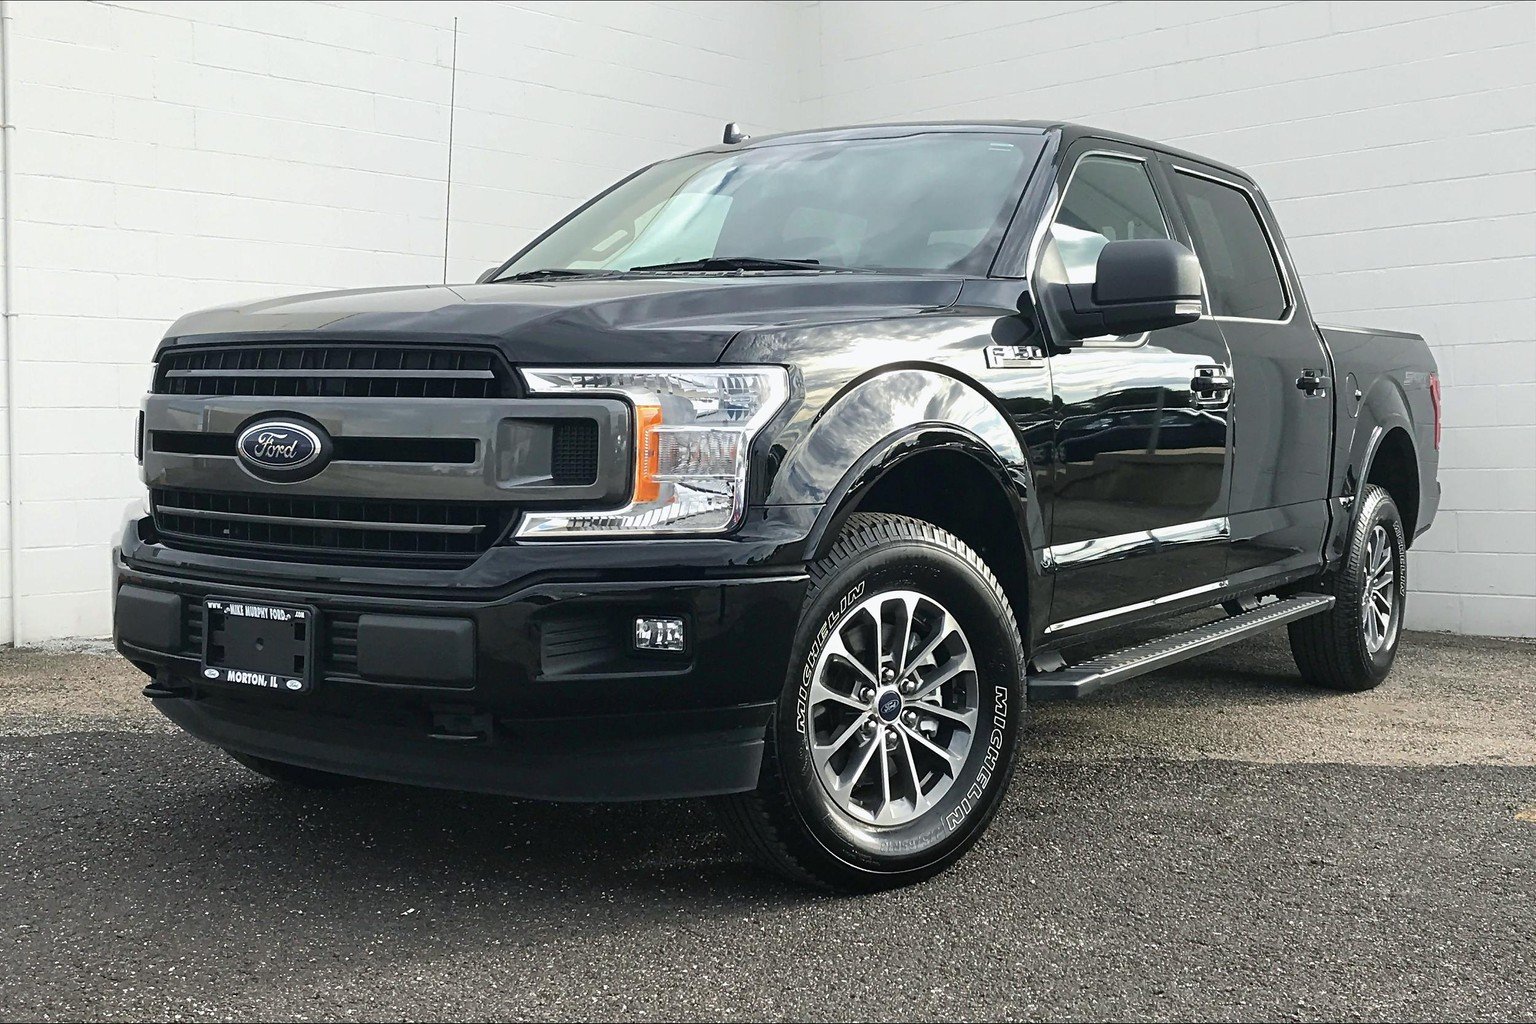 Pre-Owned 2018 Ford F-150 XLT Crew Cab Pickup in Morton #C94509 | Mike